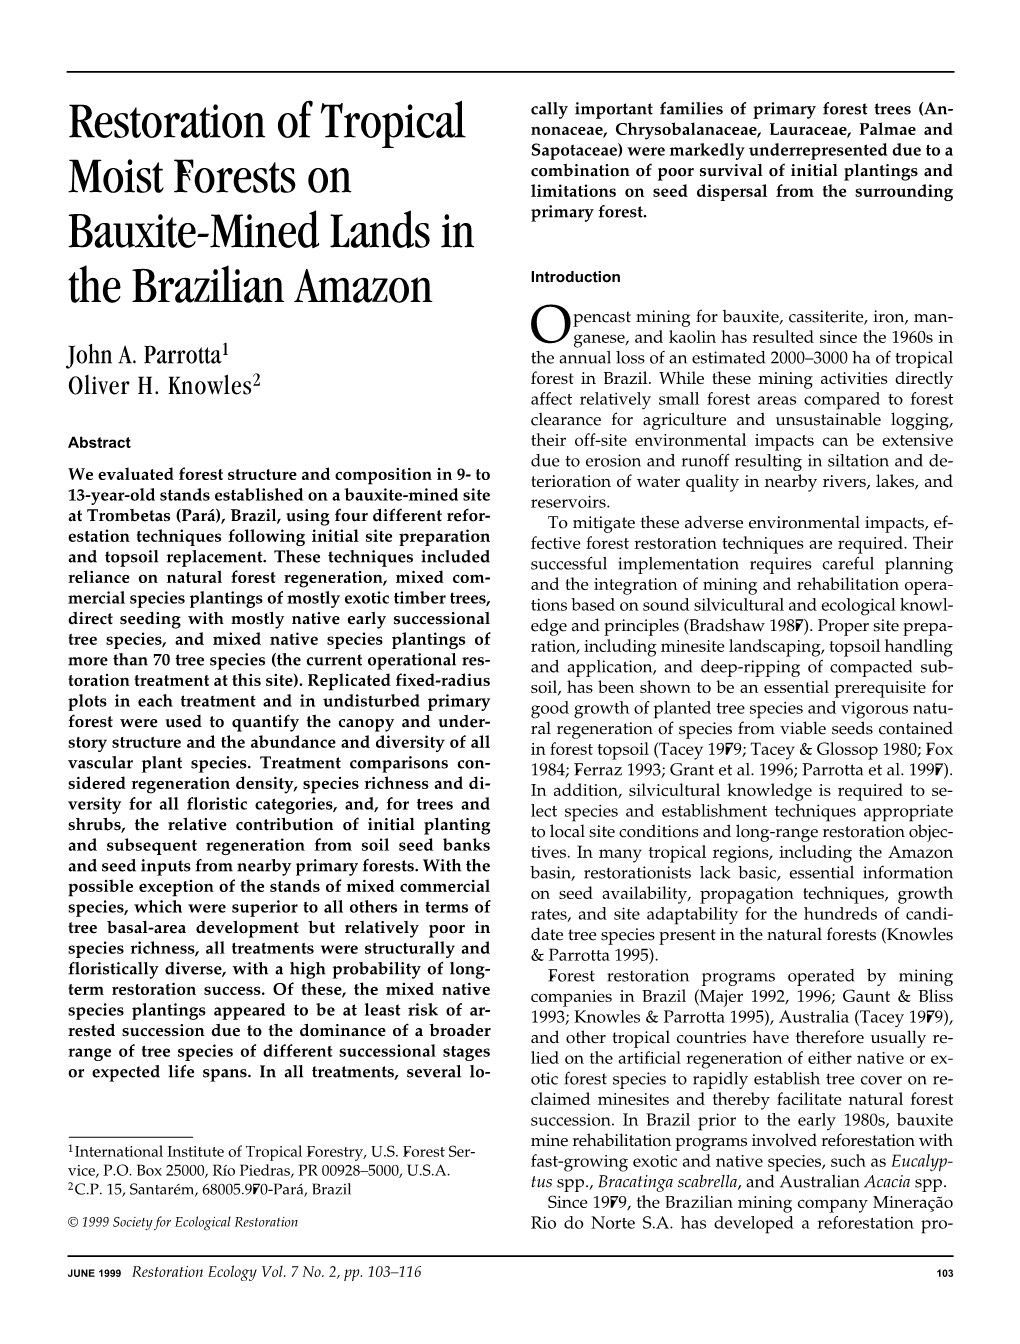 Restoration of Tropical Moist Forests on Bauxite-Mined Lands in The